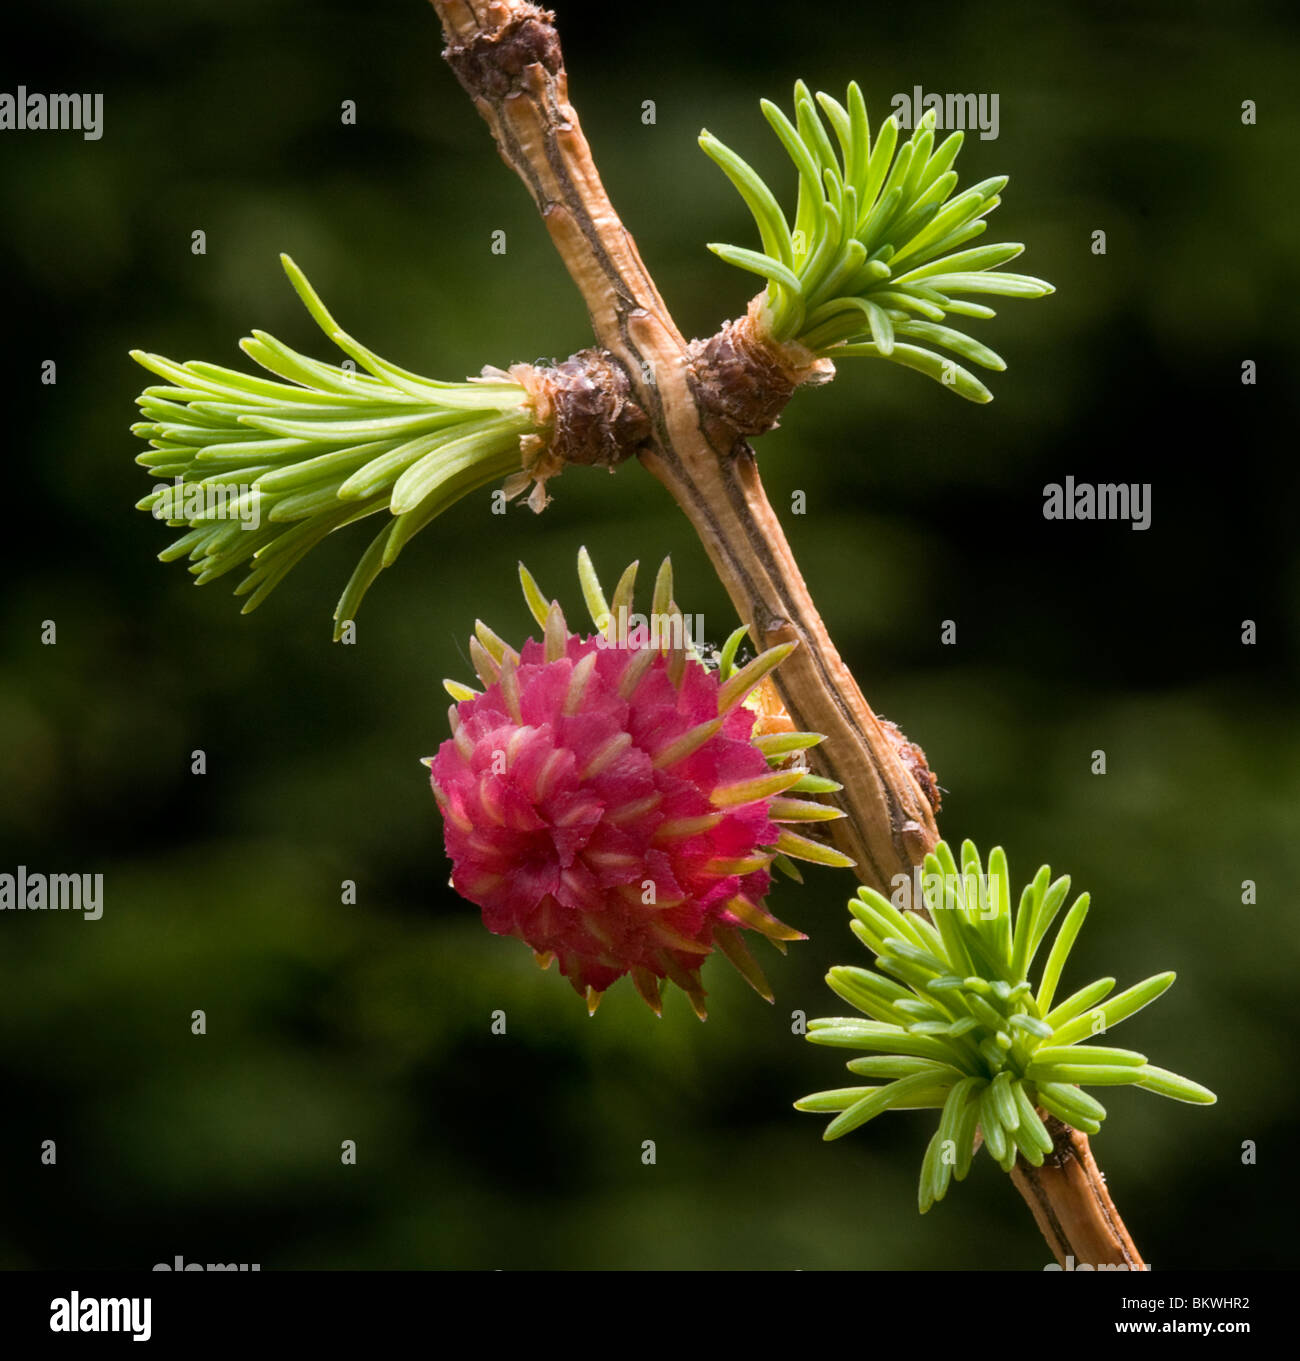 The flower and new leaves of the European Larch tree (Larix decidua) Stock Photo